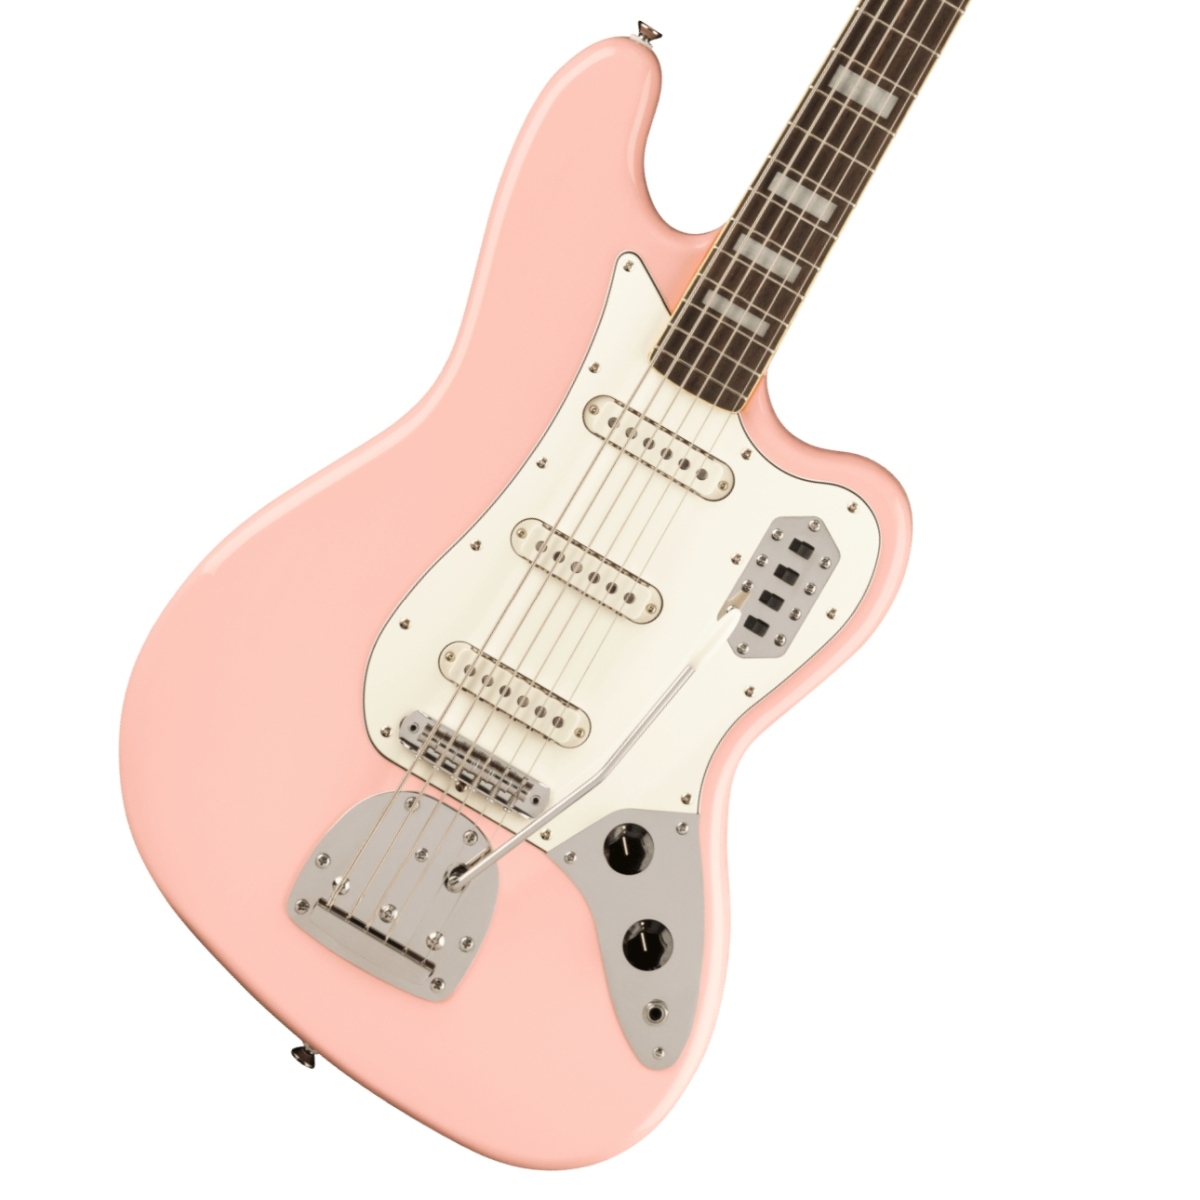 Squier P Bass by Fender - クラシックサウンドの実現 豪華で新しい